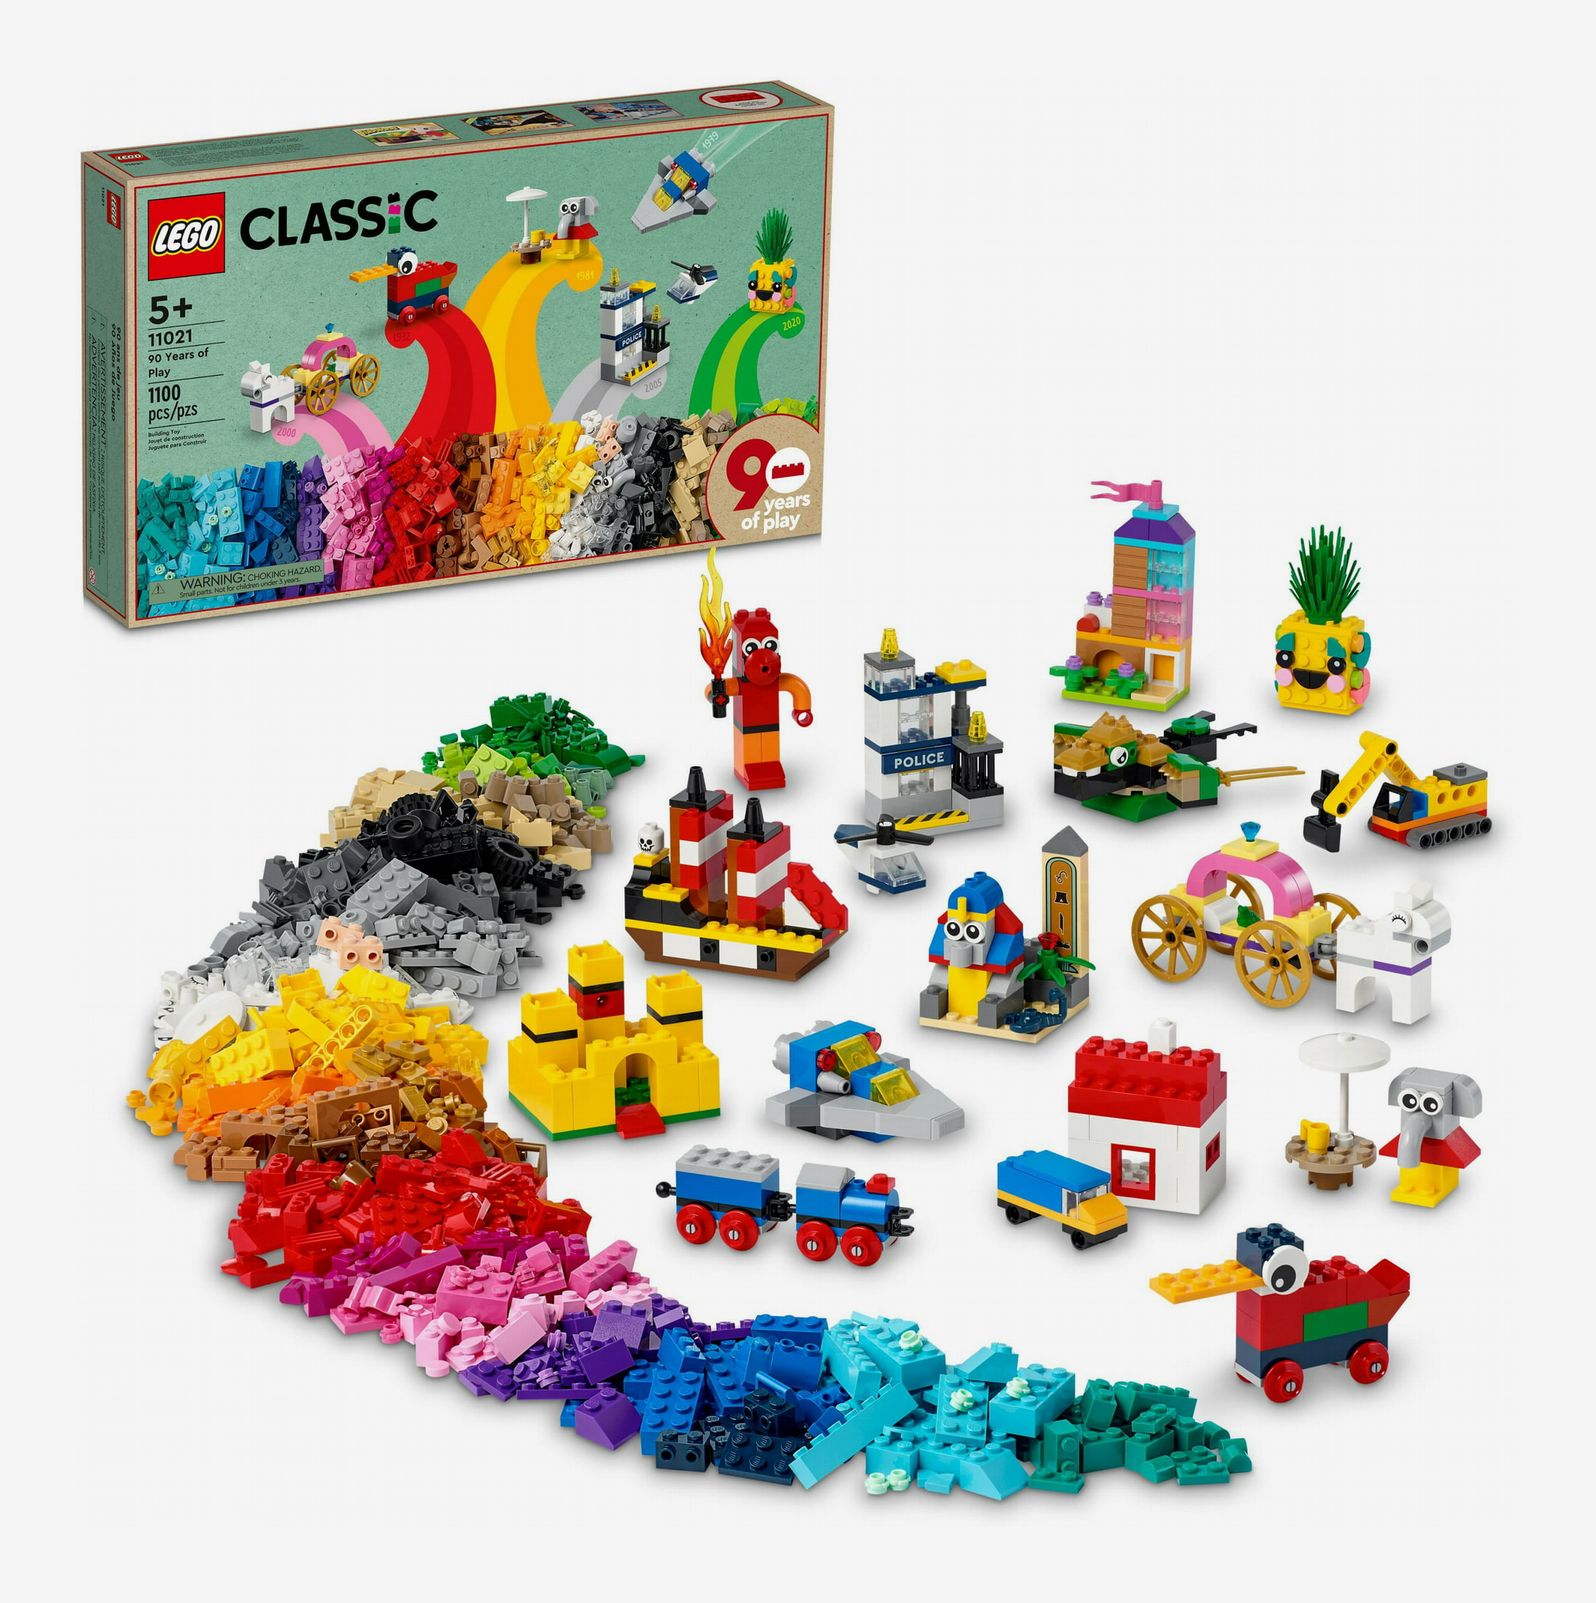 This 1,000-Piece Lego Set Is Just $40 Today